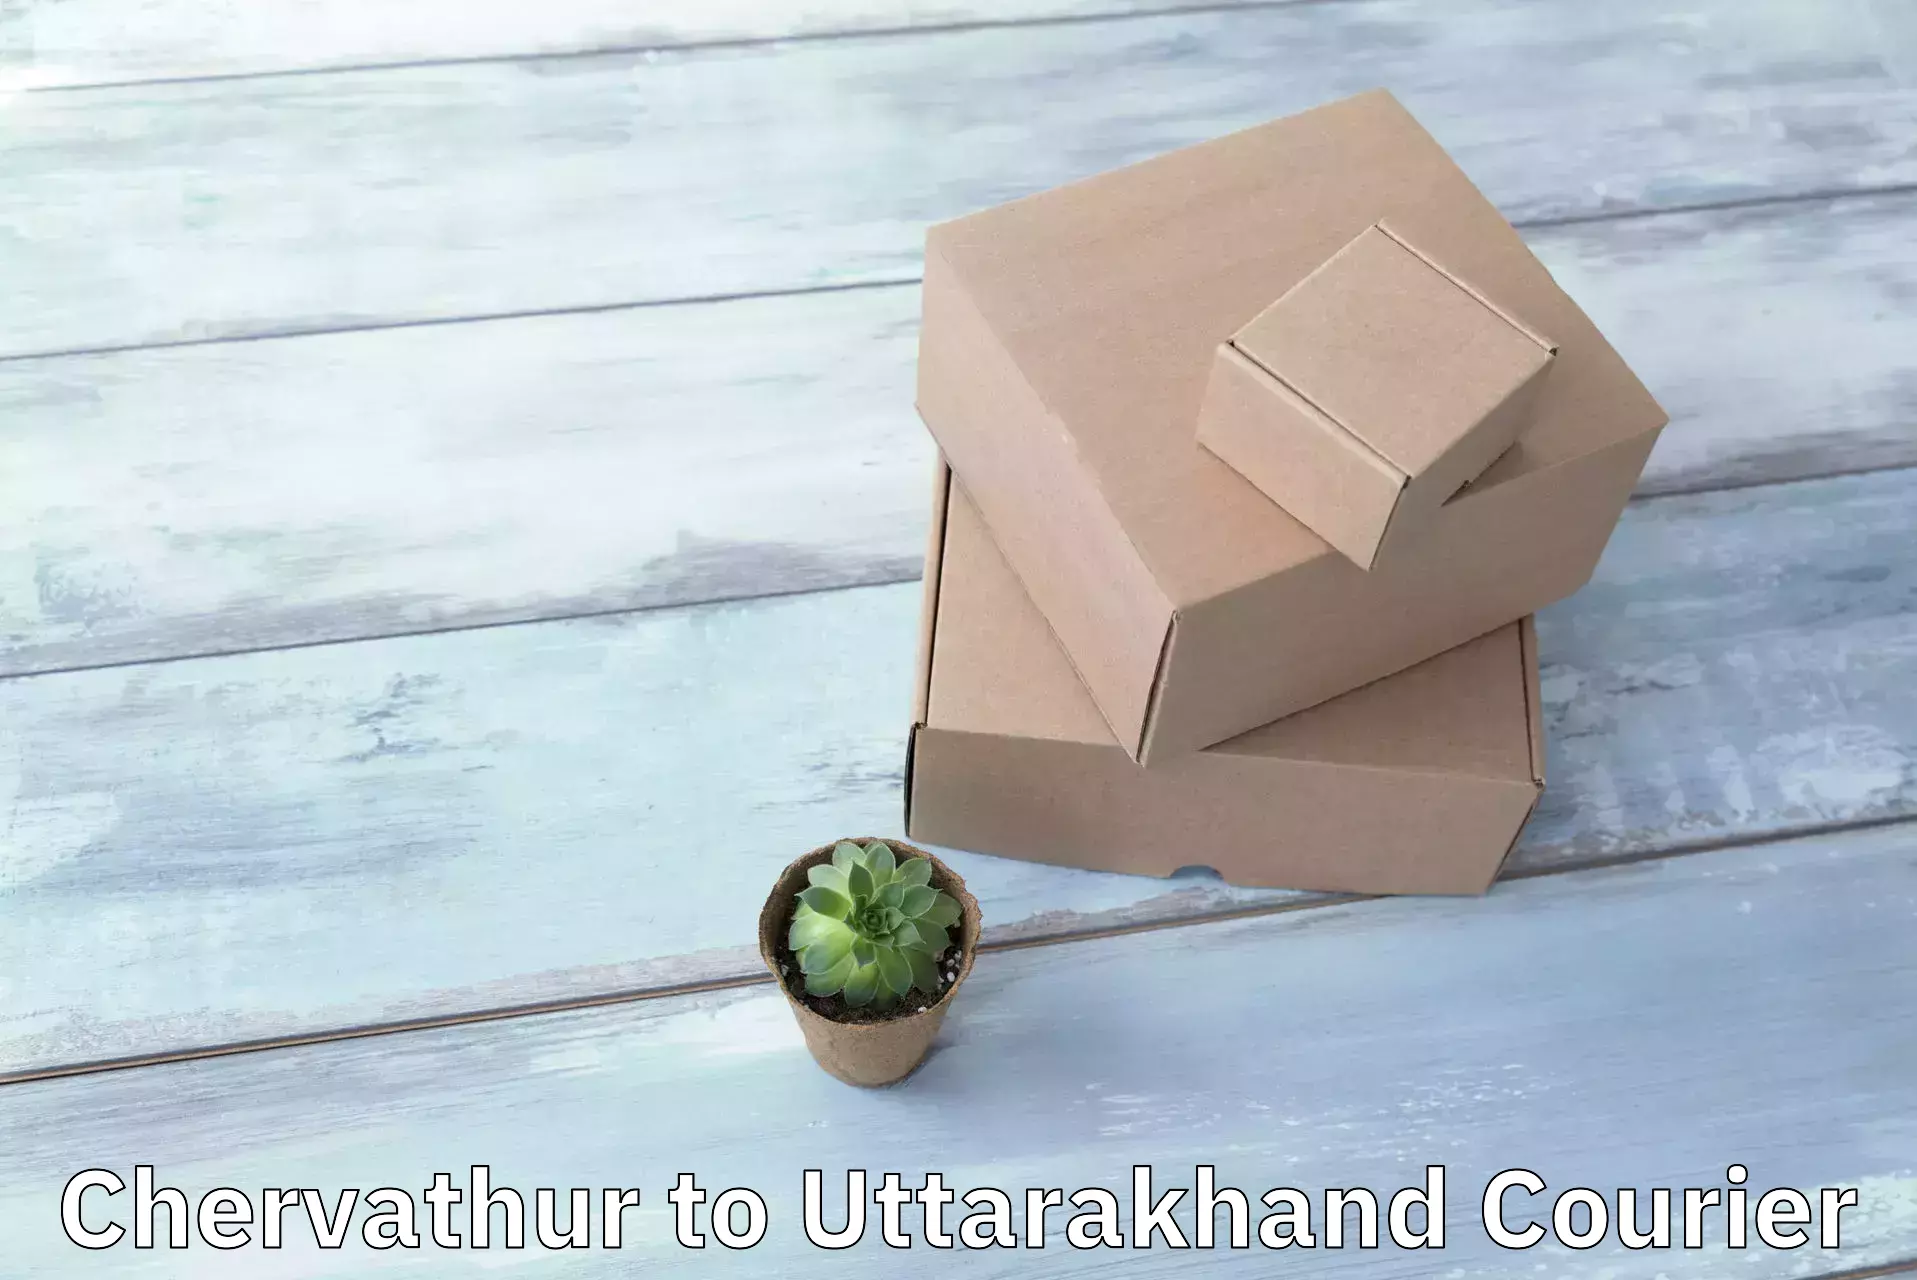 Retail shipping solutions Chervathur to Haldwani